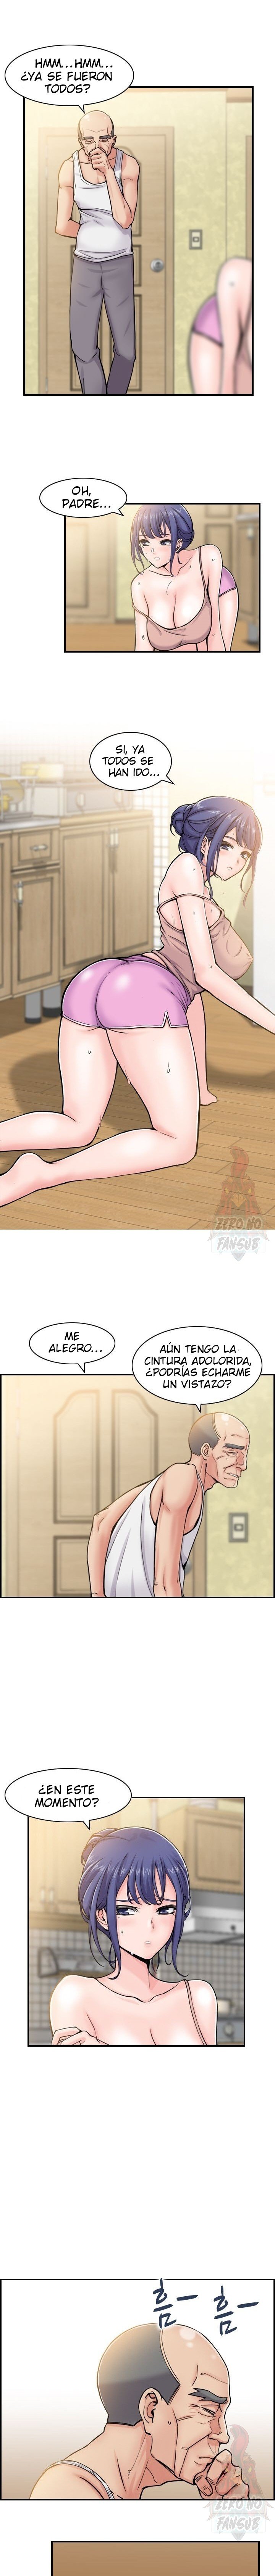 Sister in Law Manhwa Raw - Chapter 4 Page 4